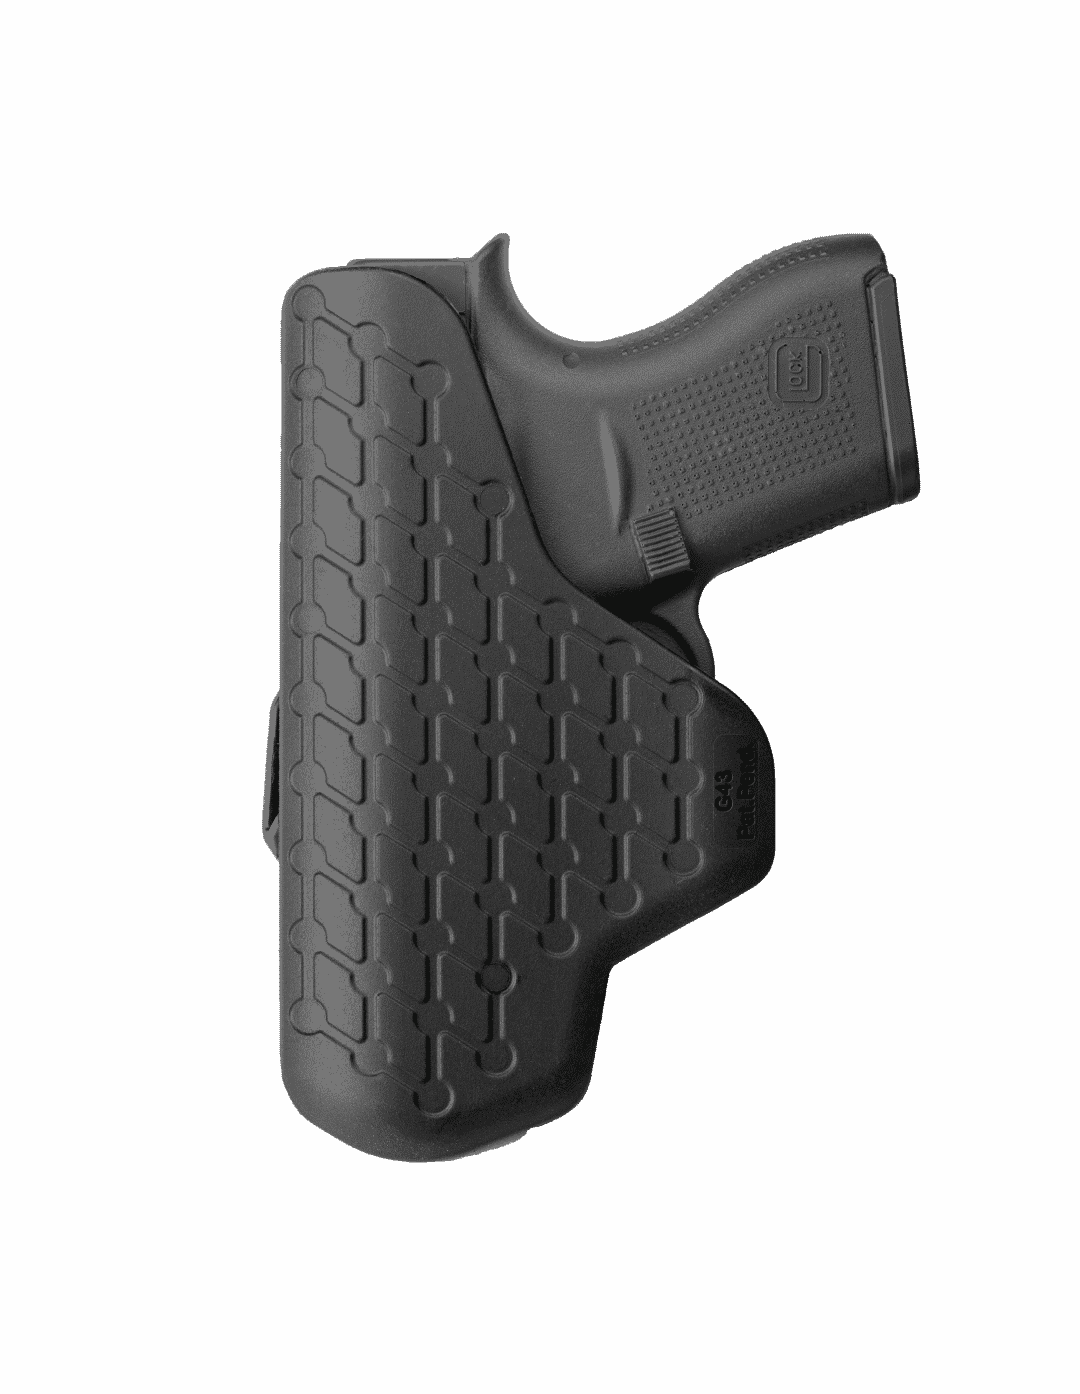 Fab defense scorpus covert g43 iwb holster fits glock43 us shping made in israel 